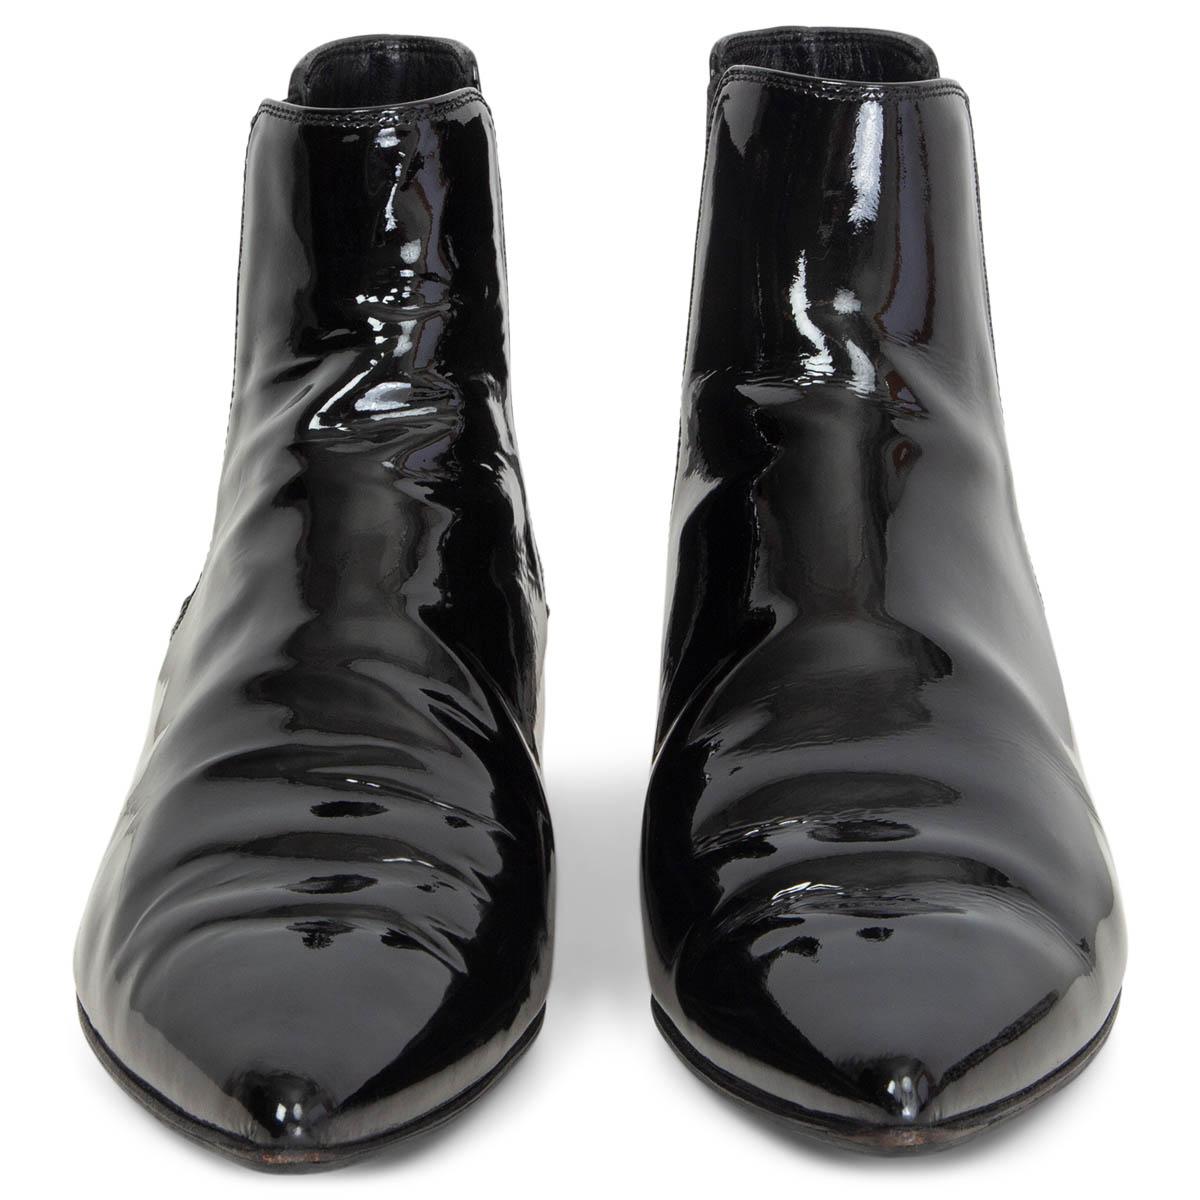 100% authentic Saint Laurent pointed-toe ankle-boots in black patent leather. Have been worn with some soft creasing on the instep. Overall in excellent condition. Rubber sole has been added. Come with dust bag. 

Measurements
Imprinted Size	36
Shoe